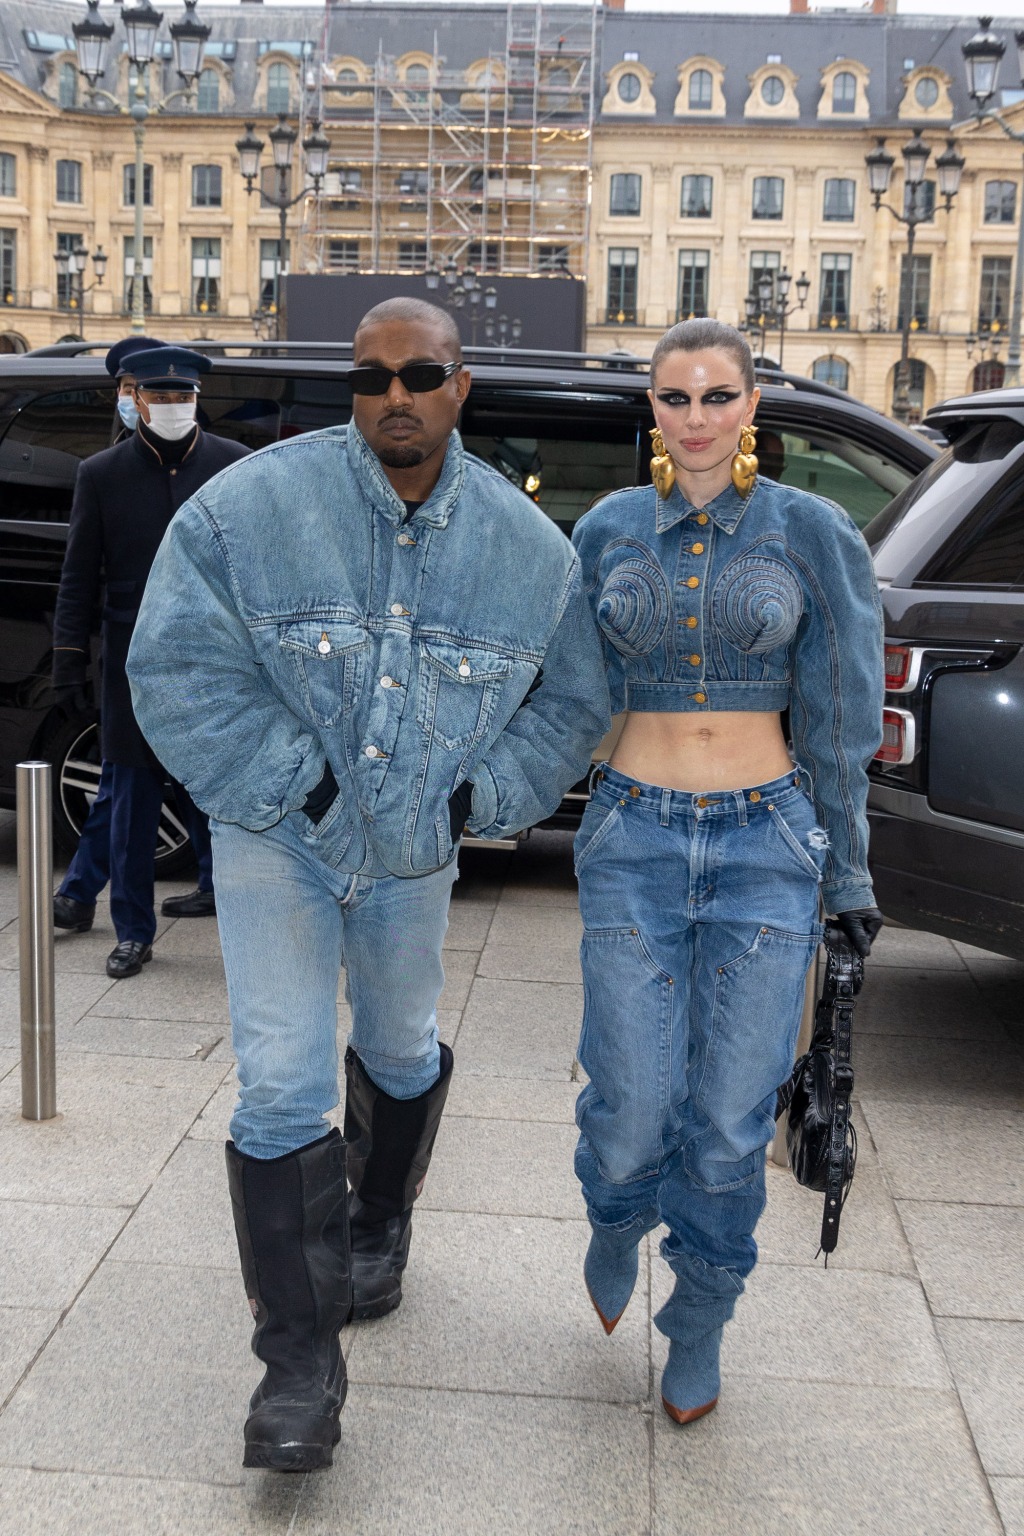 Kanye West and Julia Fox's denim outfits